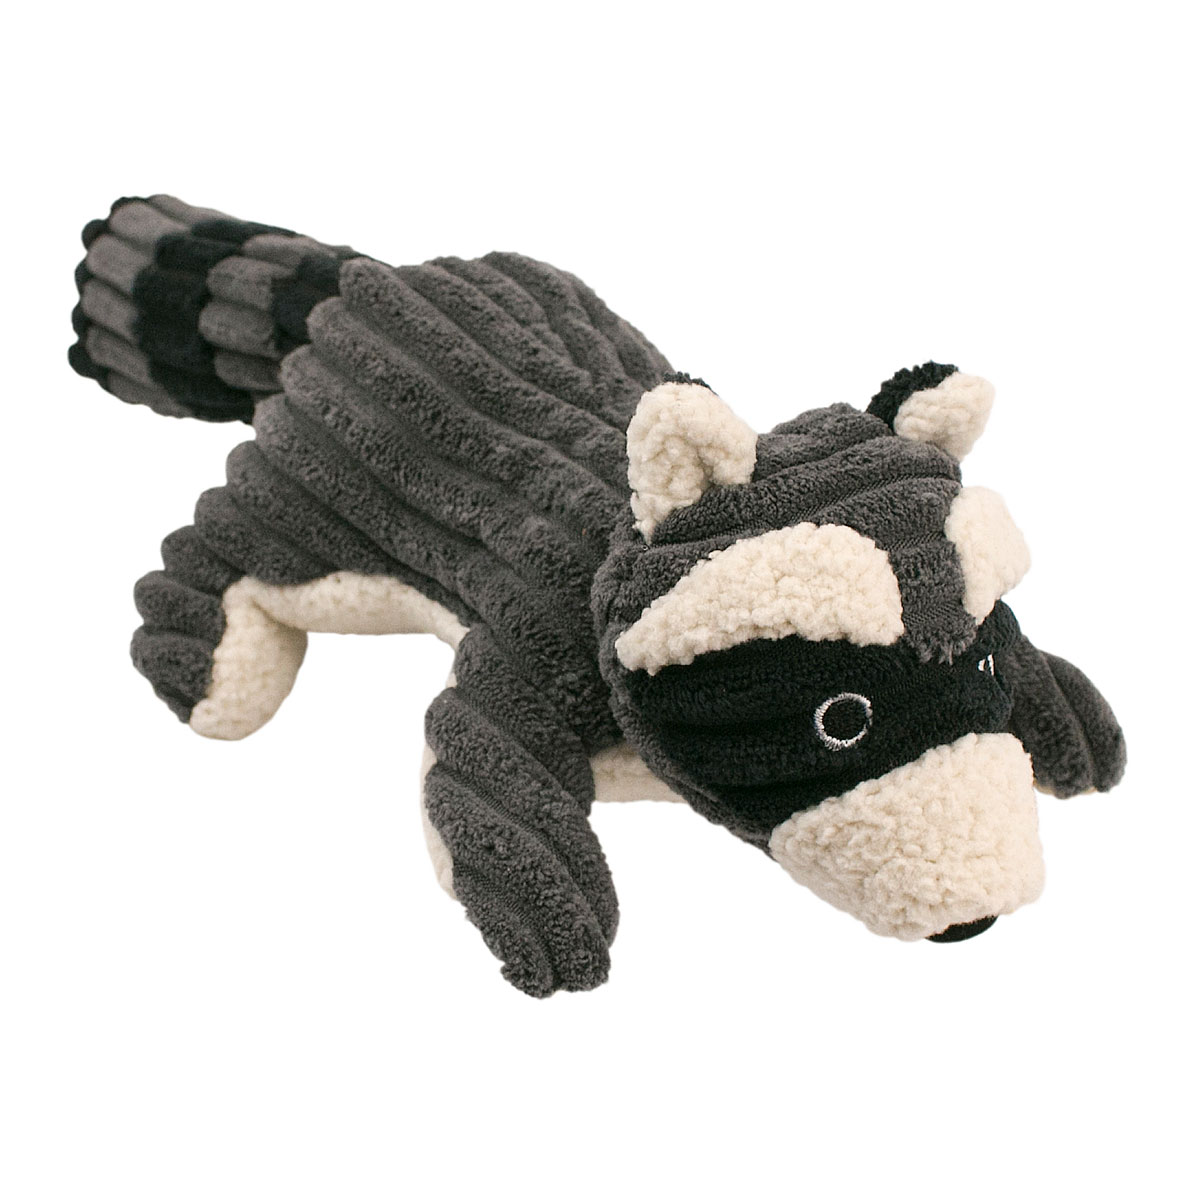 Tall Tails Plush Raccoon with Squeaker Toy - Hala's Paws